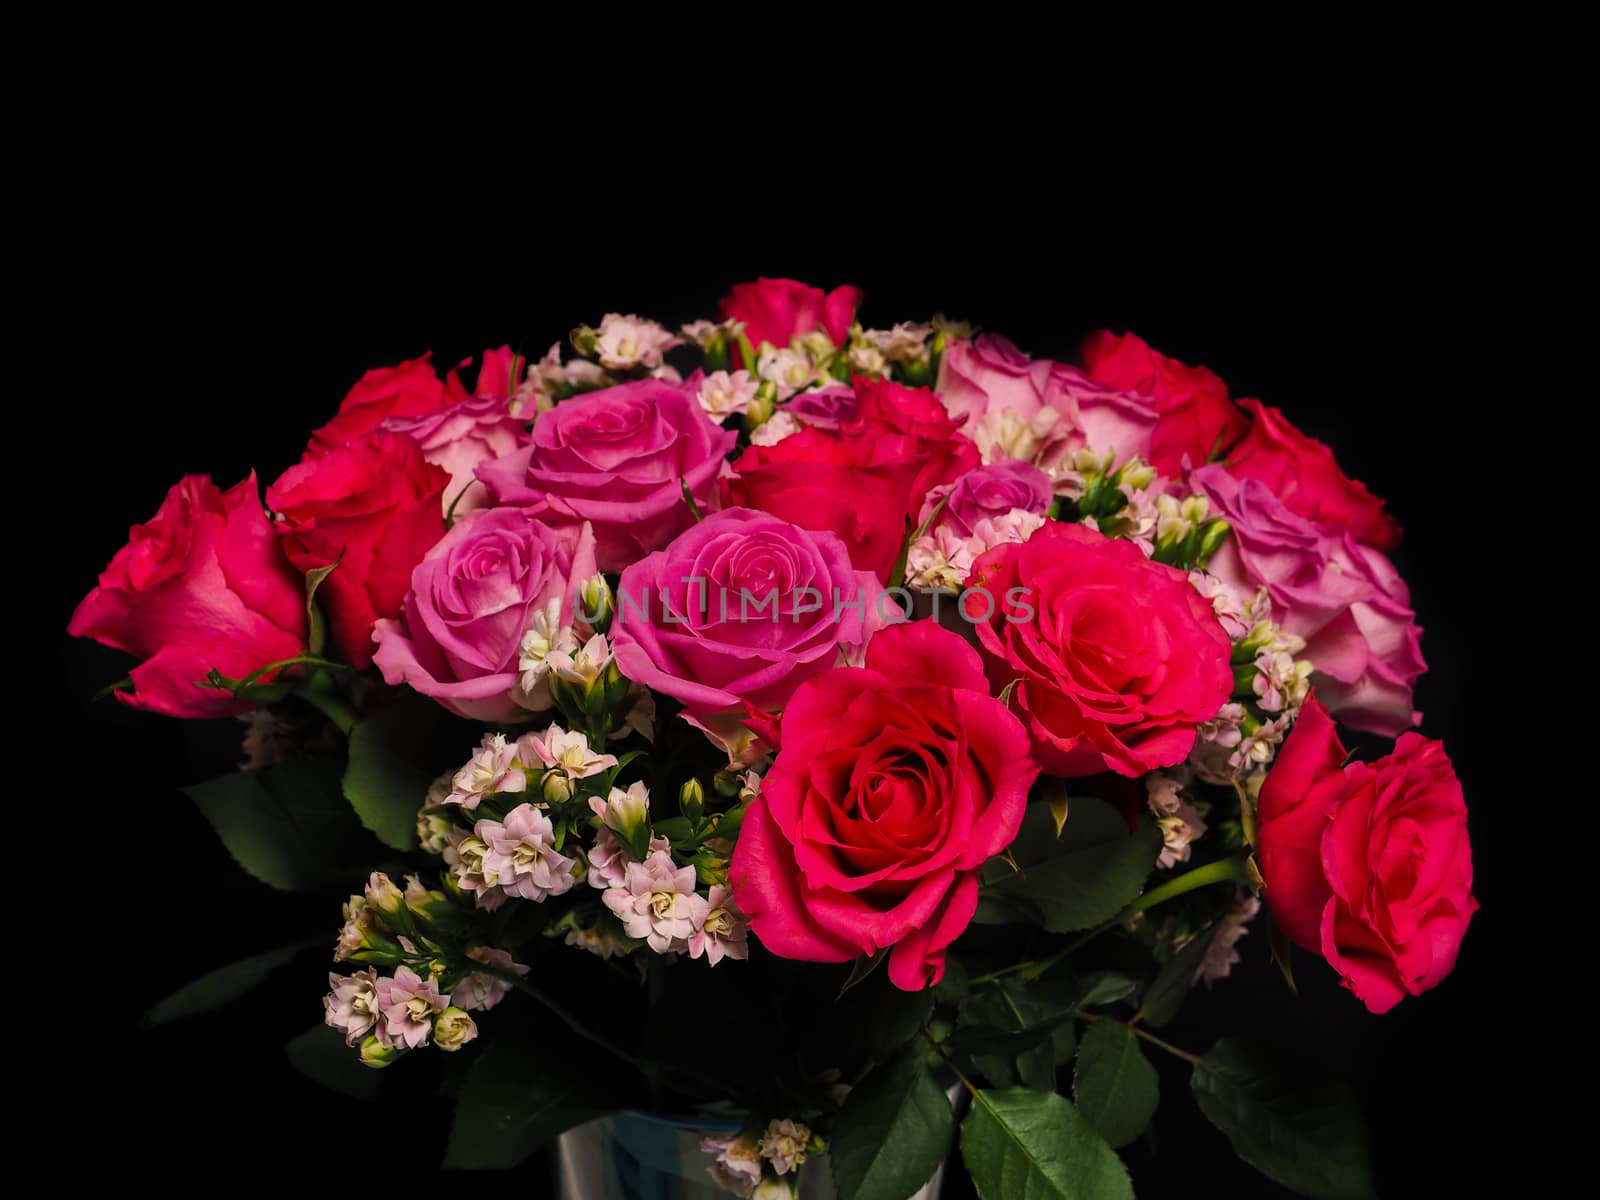 Bouquet of pink roses at closeup towards black background by Arvebettum